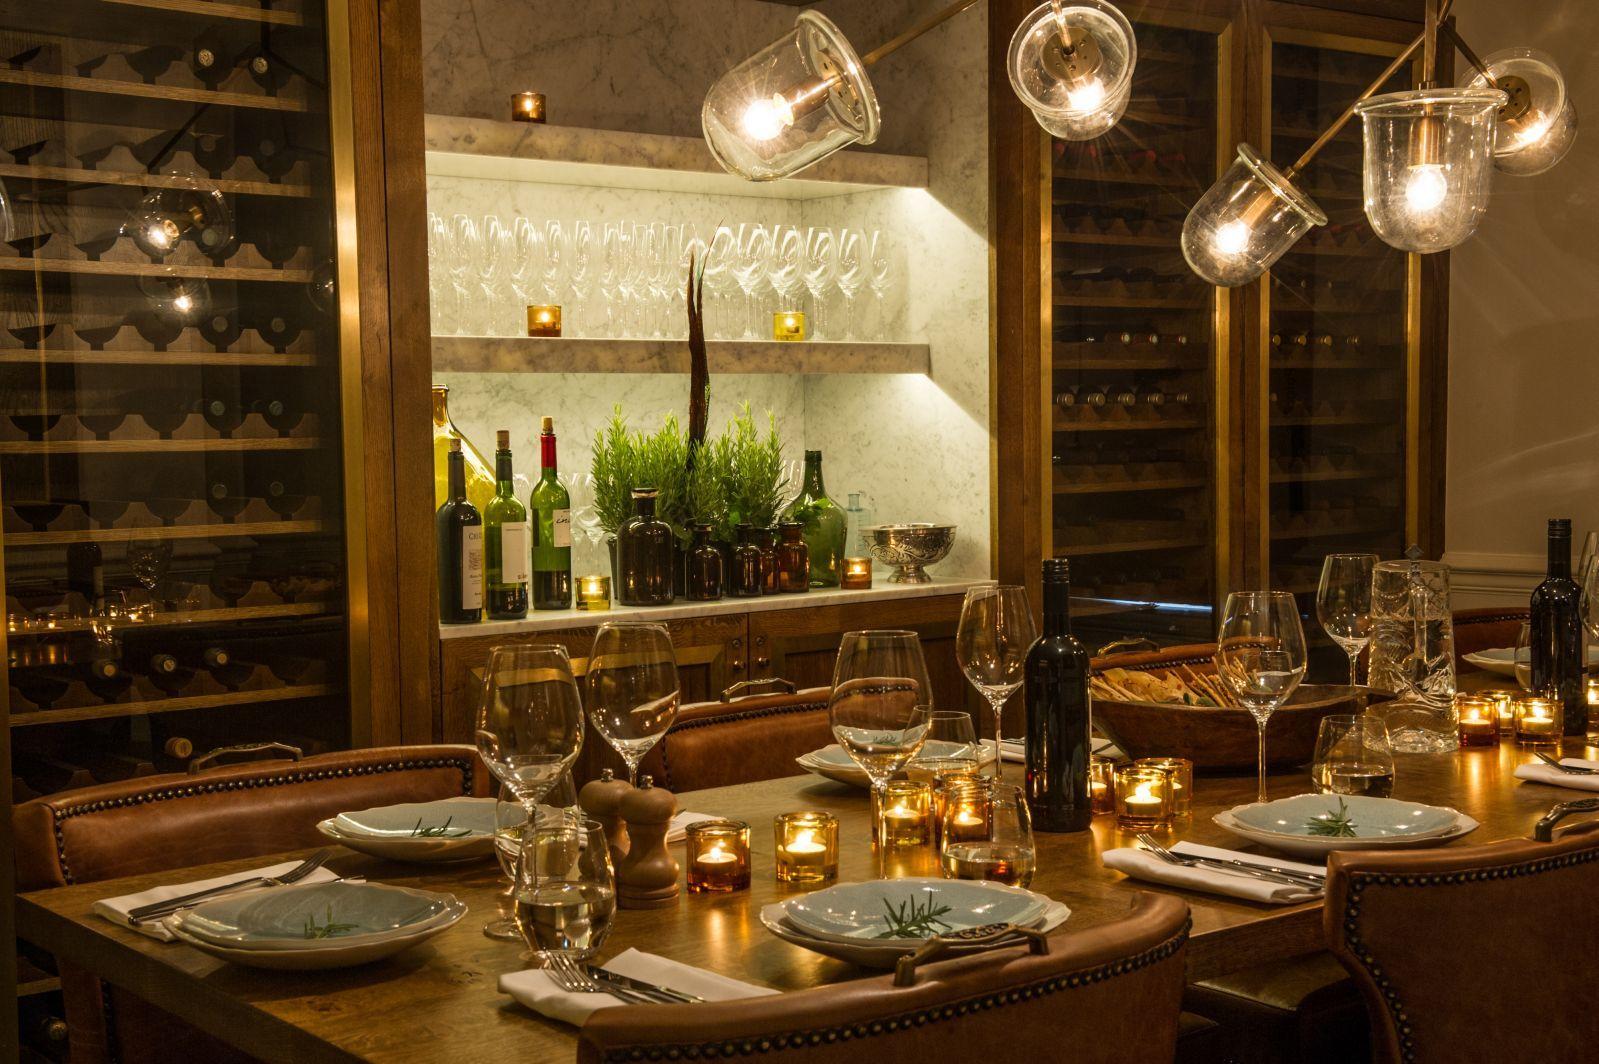 The Wine Room - Dinner, The Ampersand Hotel photo #1